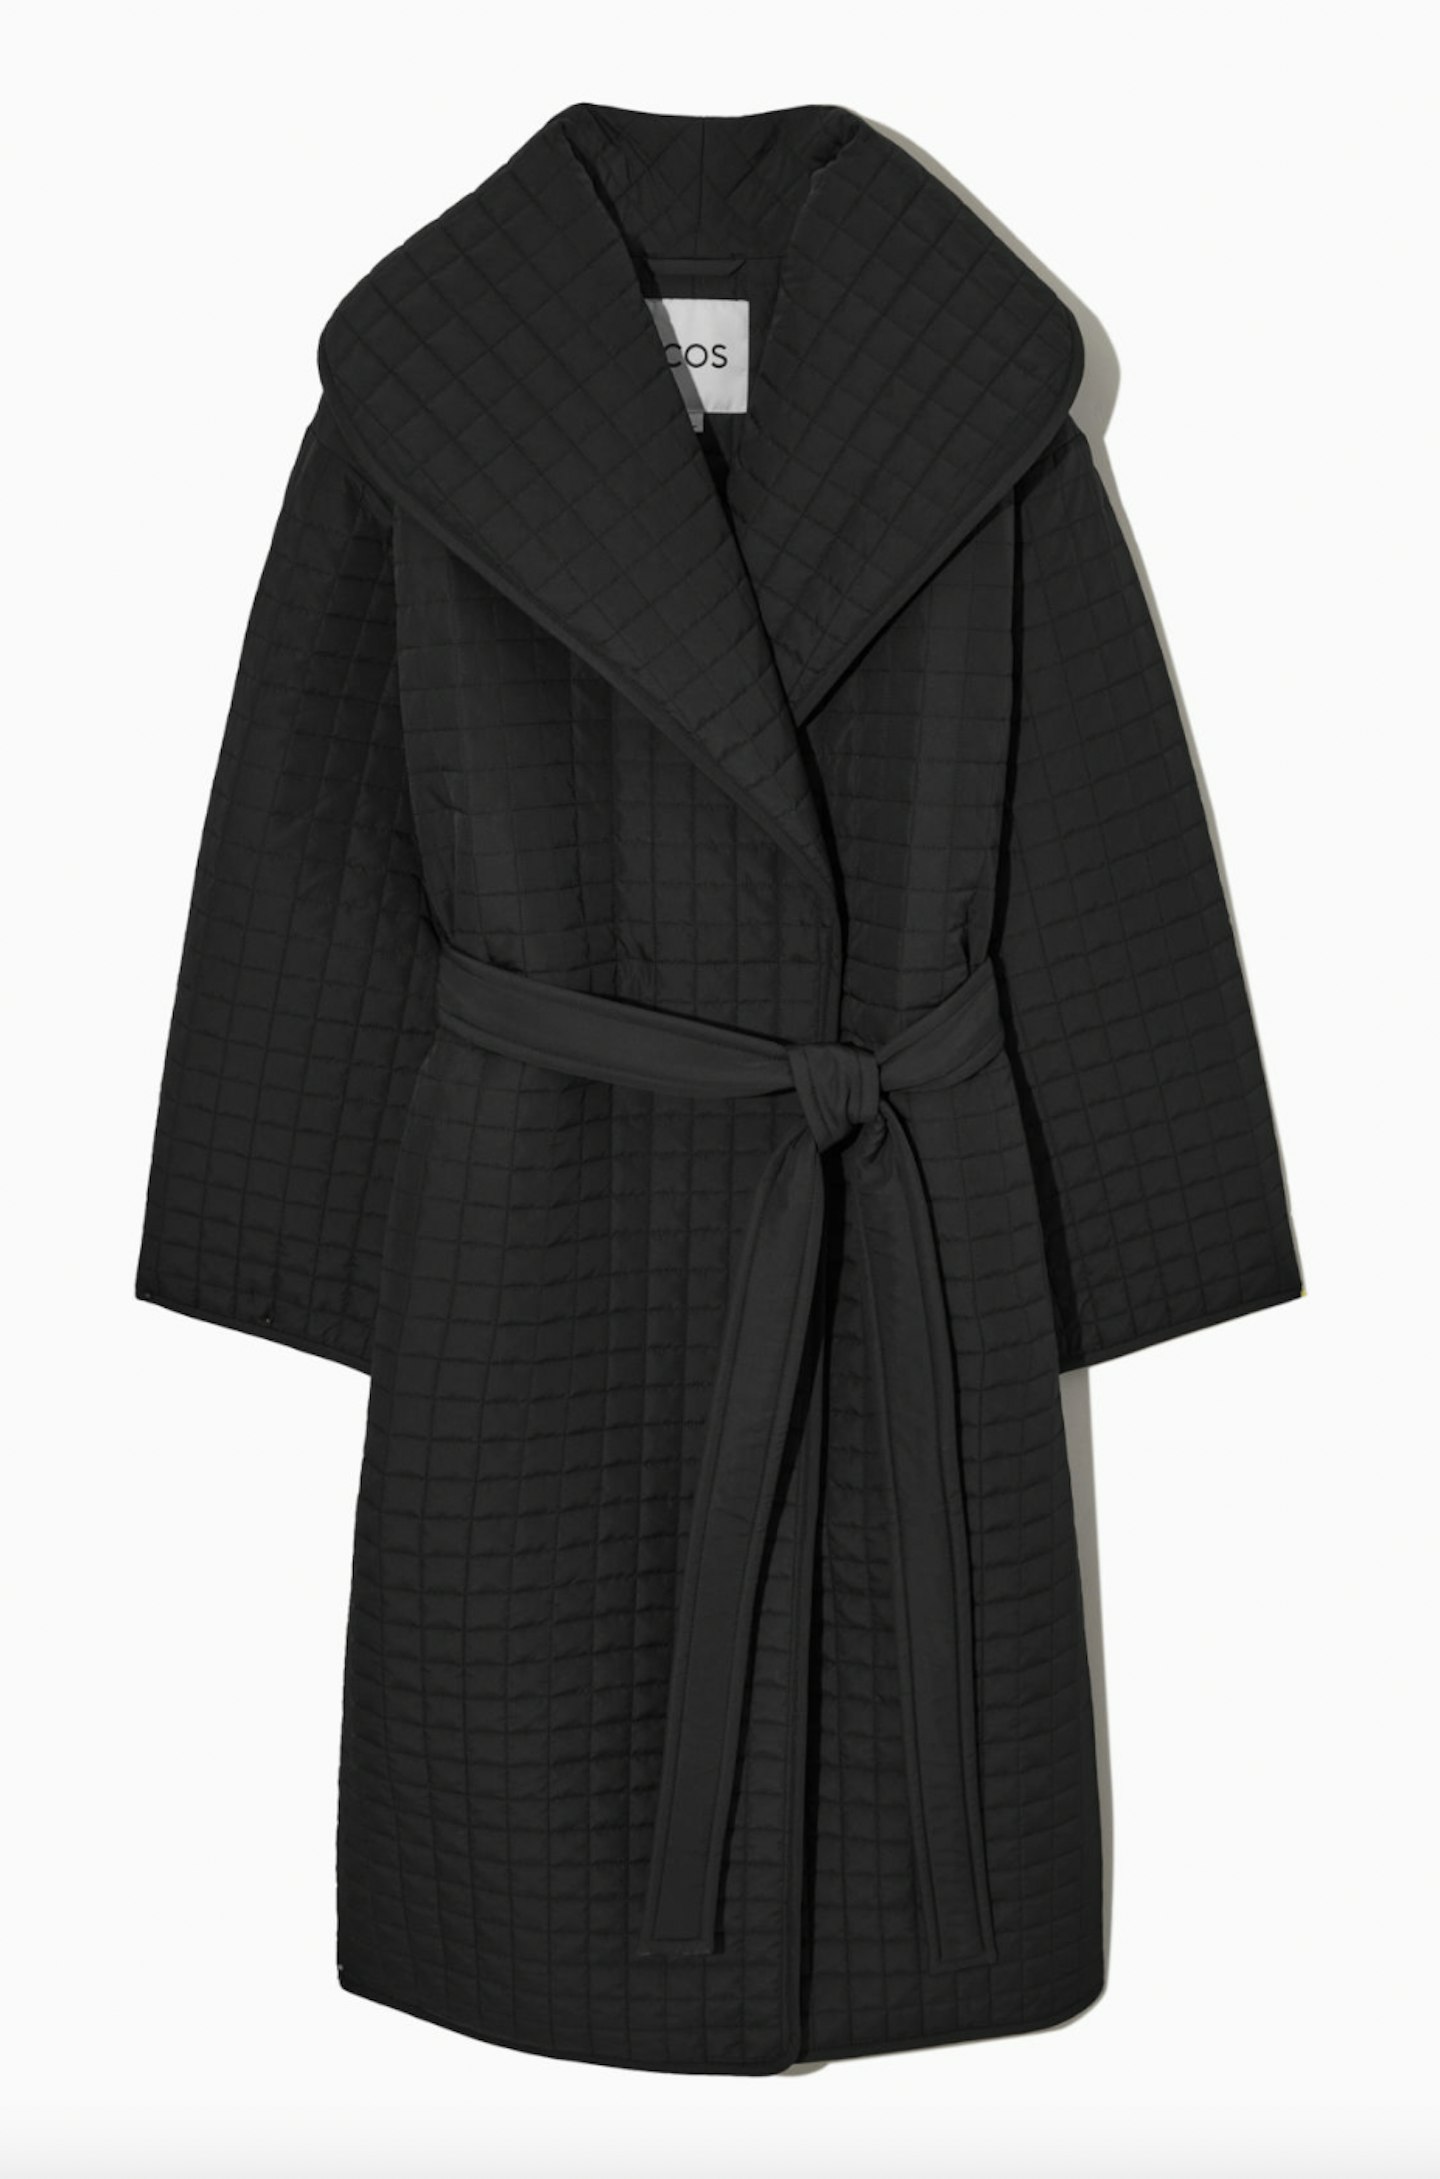 COS, Longline Quilted Liner Coat